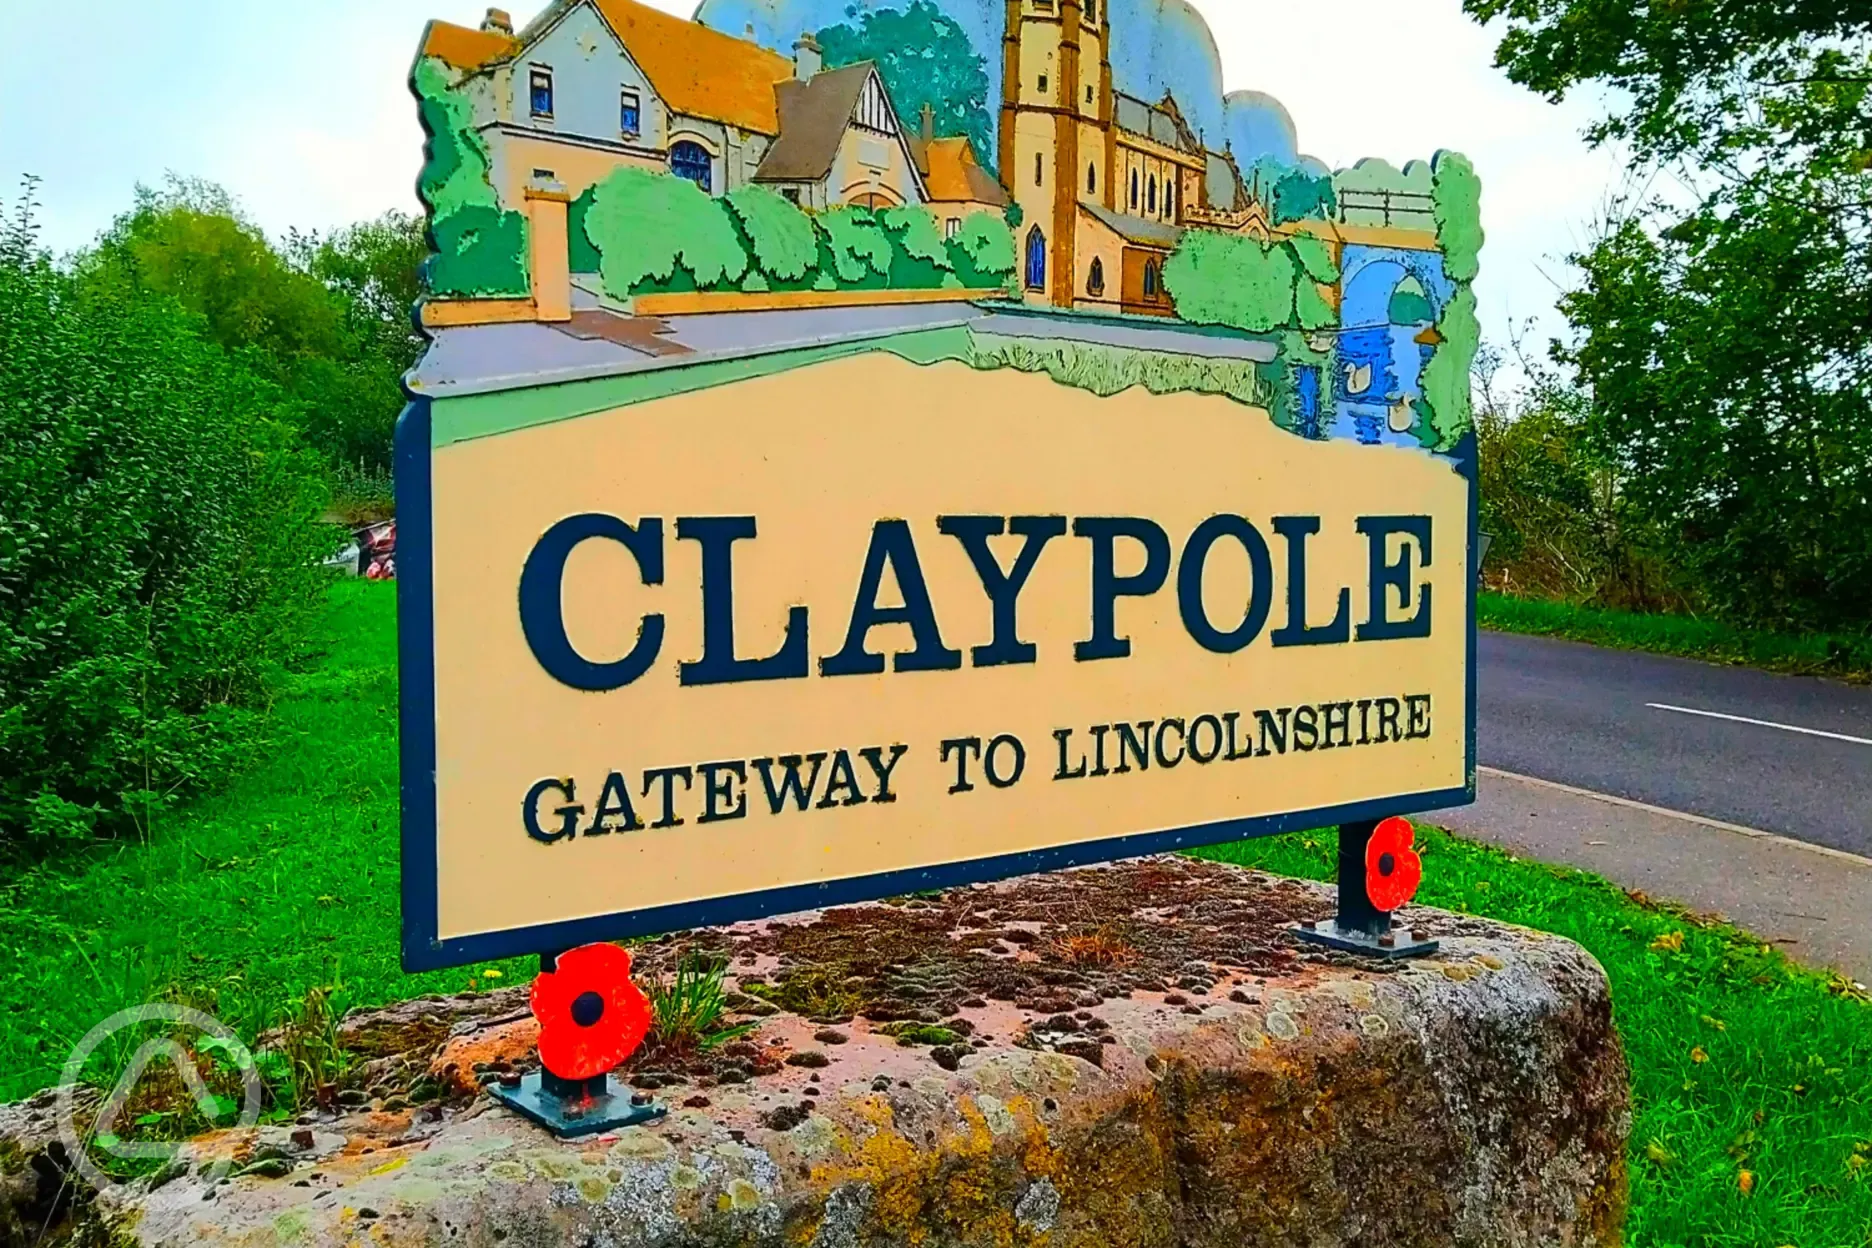 Gateway to Lincolnshire